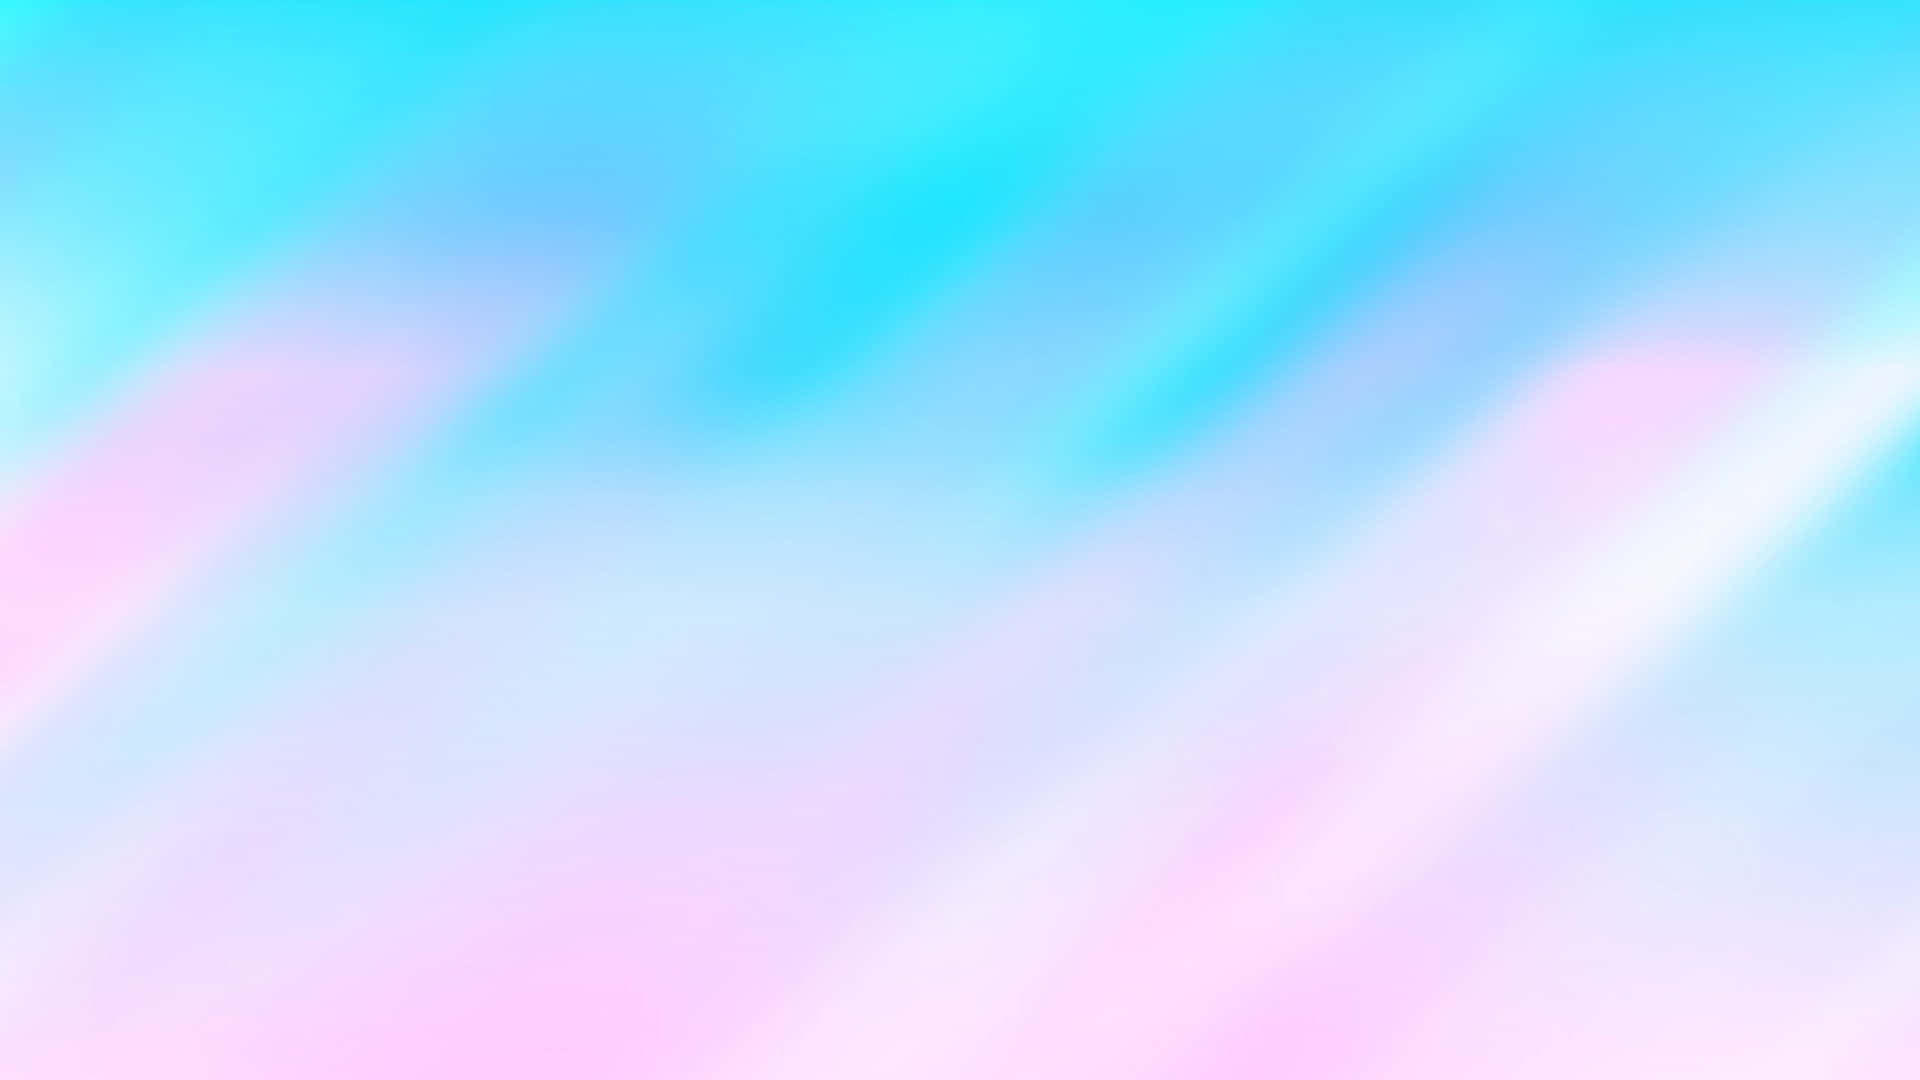 200+] Pastel Cute Background s | Wallpapers.com